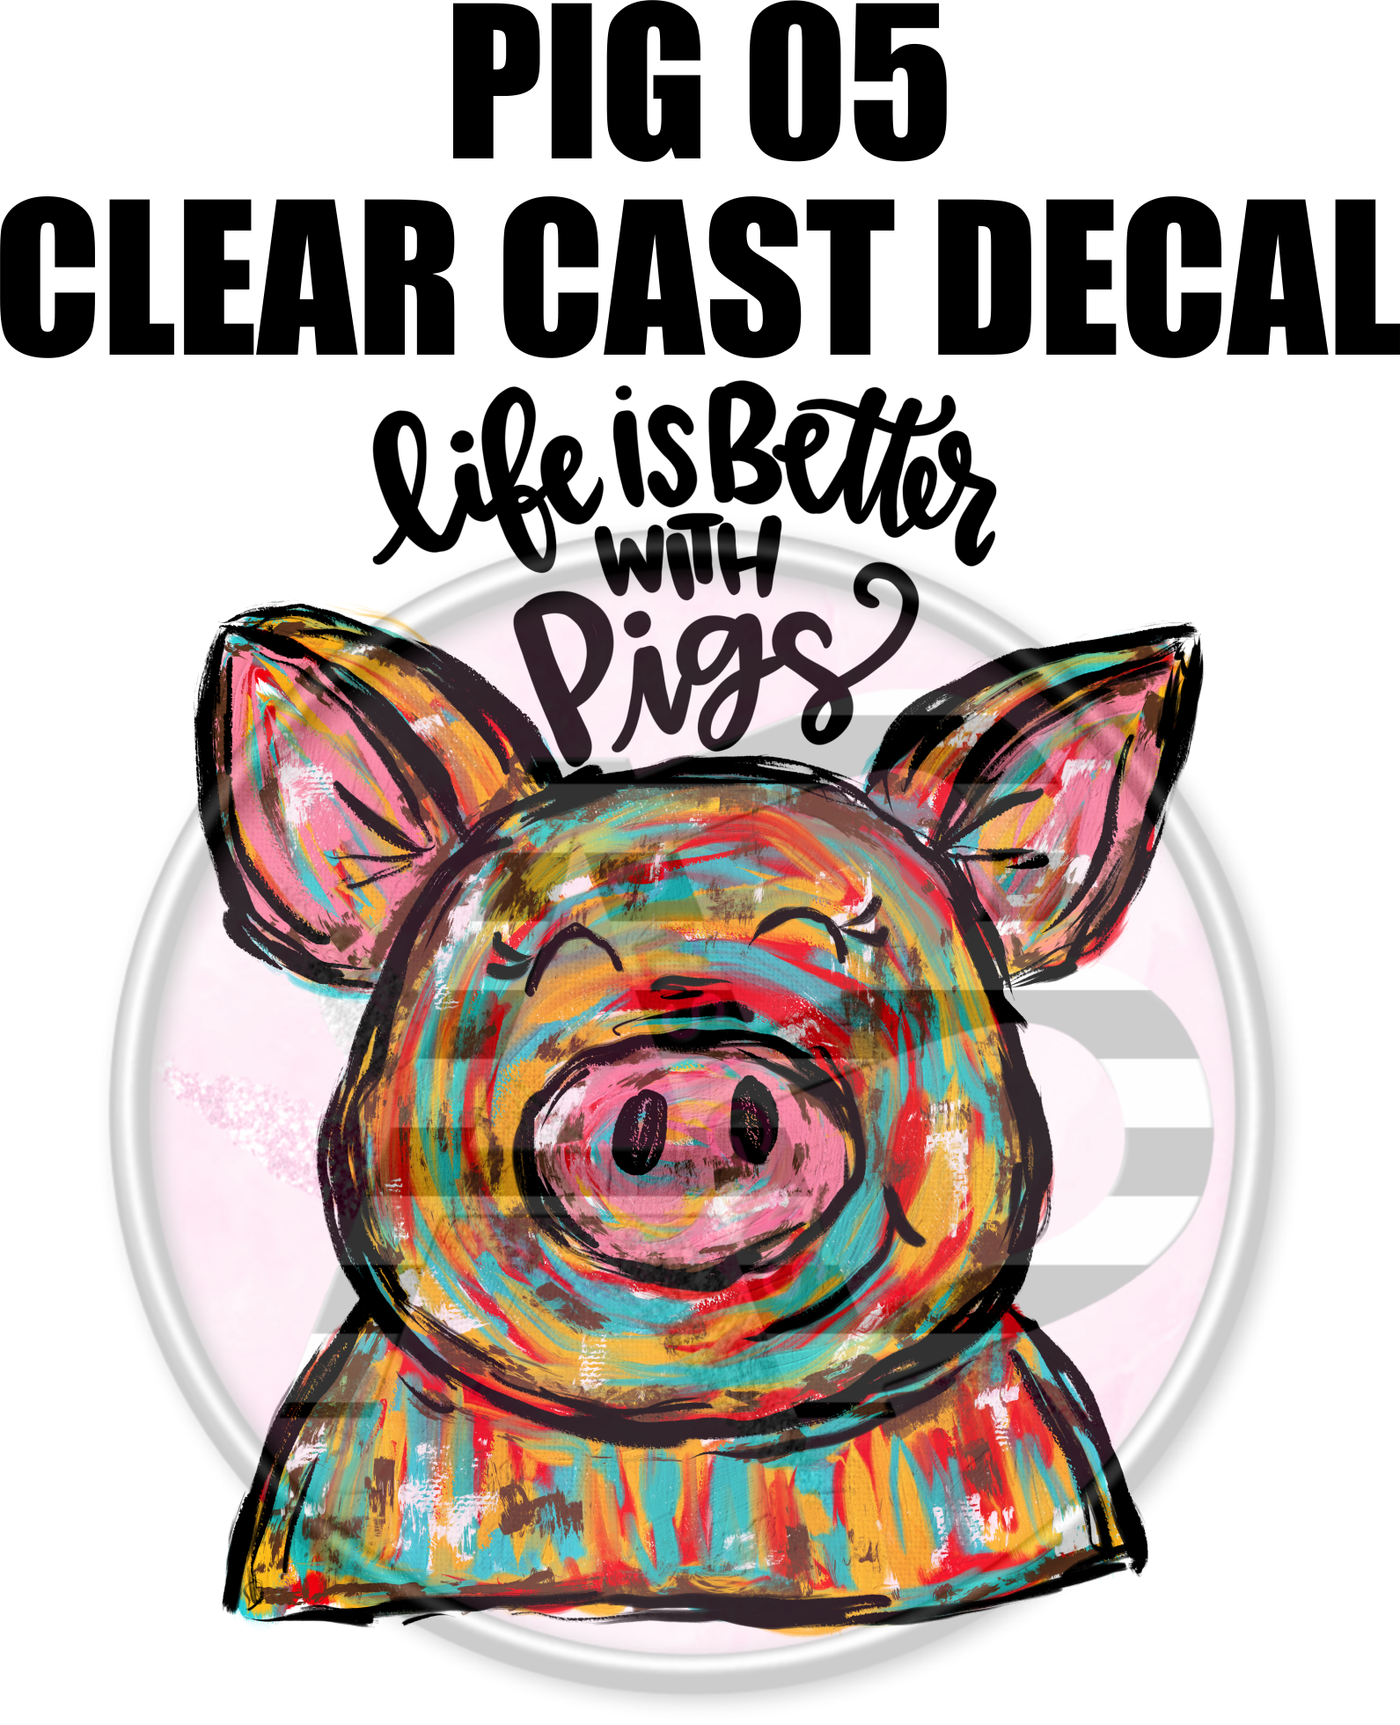 Pig 05 - Clear Cast Decal-427